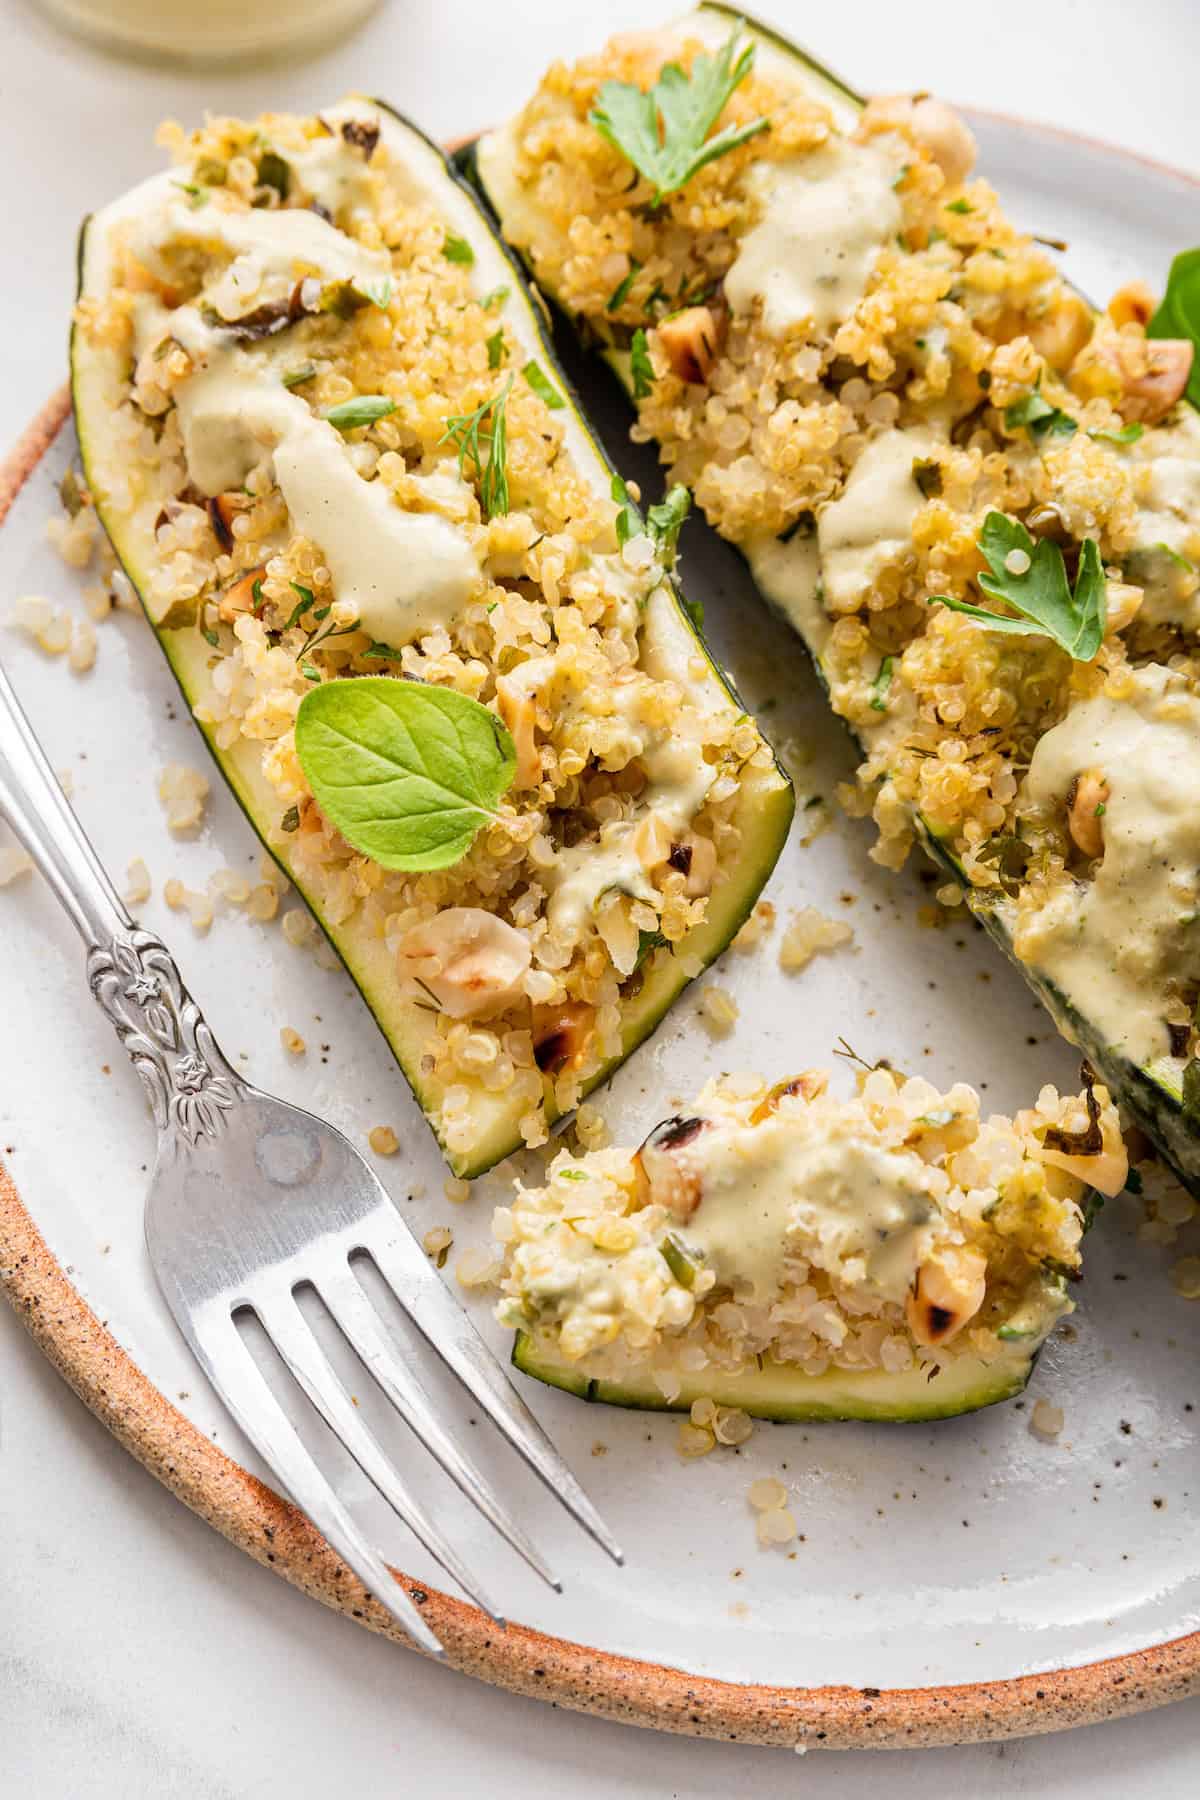 Quinoa stuffed zucchini boats on plate with bite from end